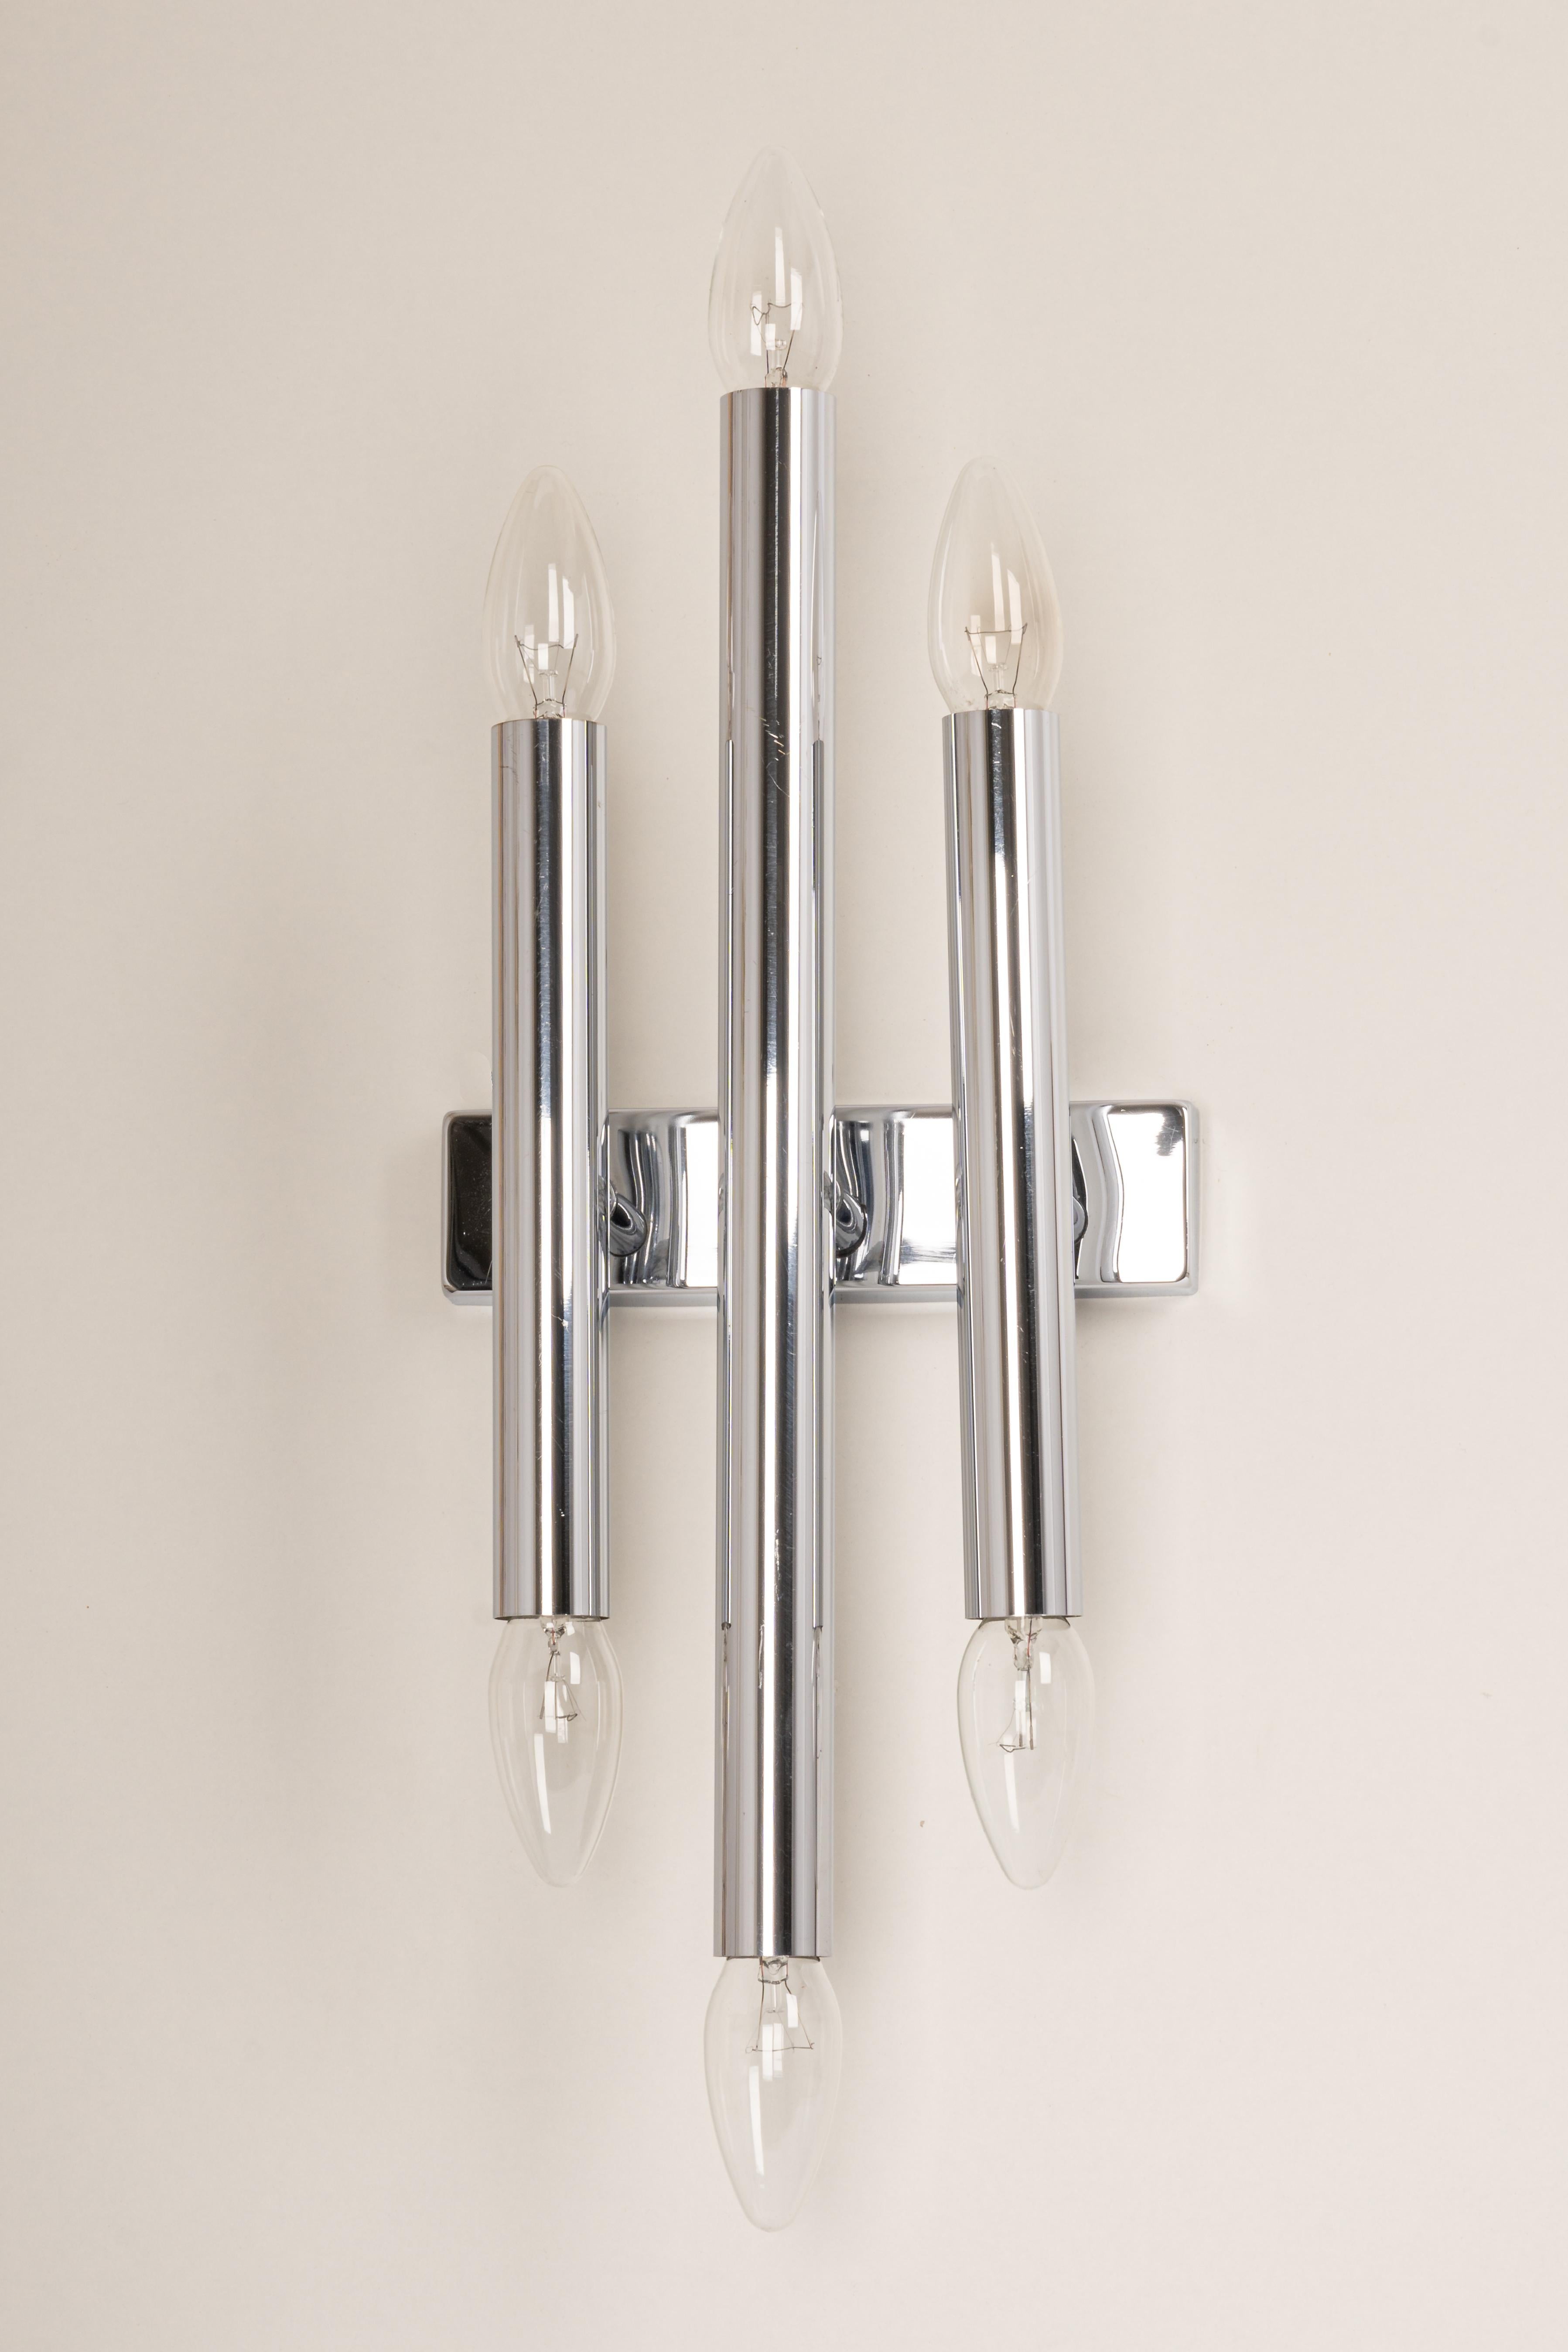 Pair of Large Italian chrome wall sconces Sciolari style, 1970s.
Each wall light needs 6 x E14 small bulb.
Light bulbs are not included. It is possible to install this fixture in all countries (US, UK, Europe, Asia, Australia,..)
Good